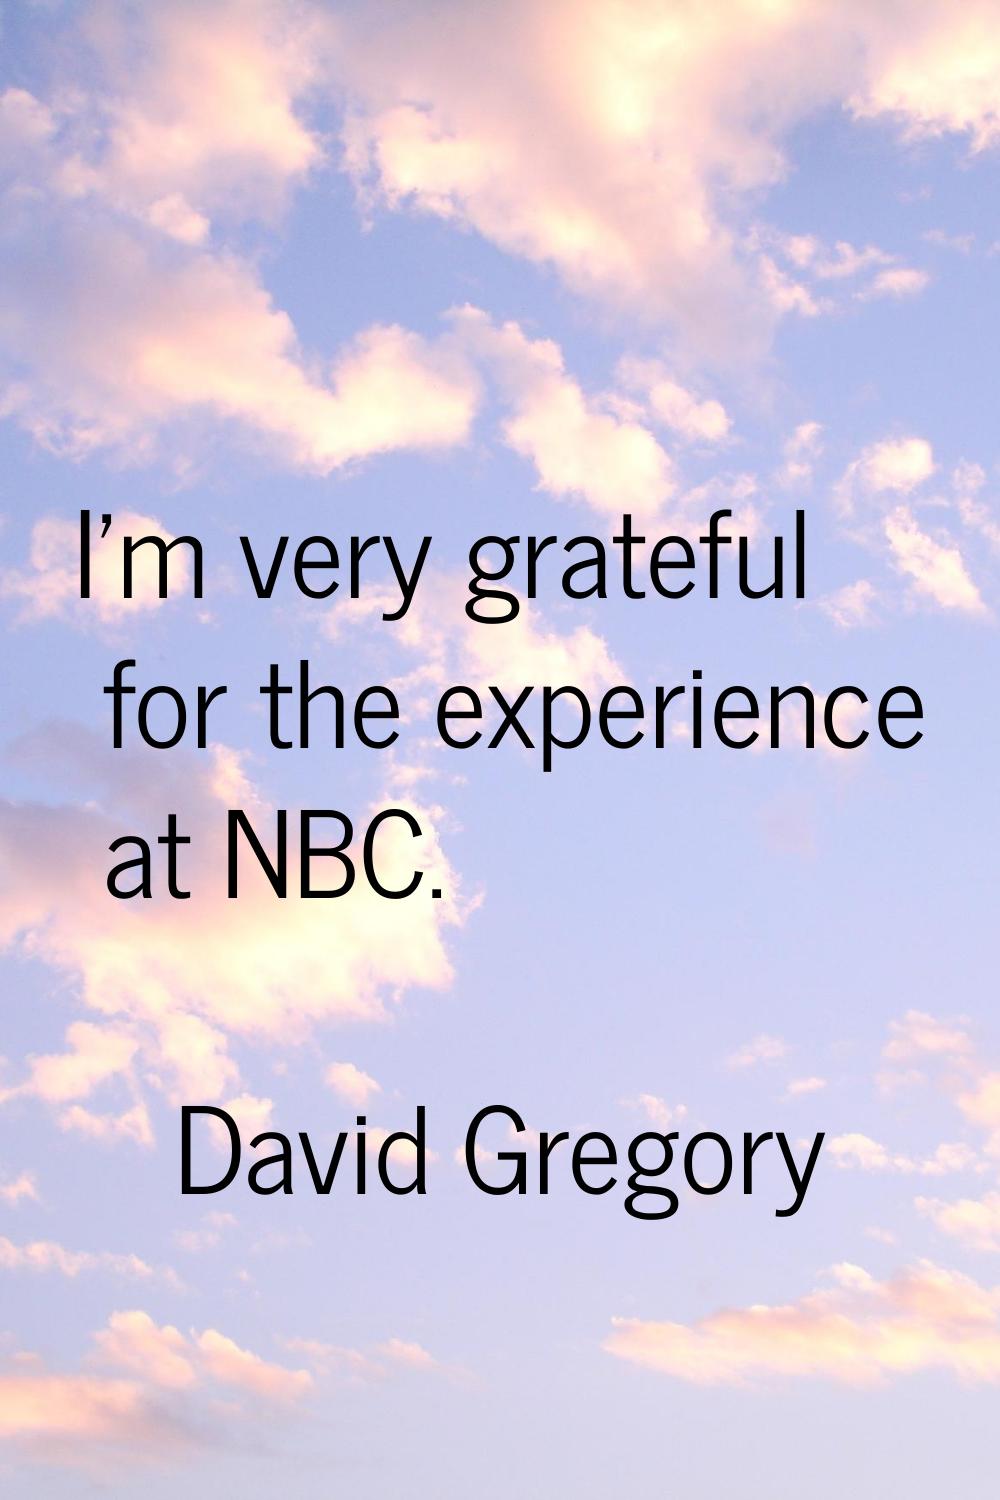 I'm very grateful for the experience at NBC.